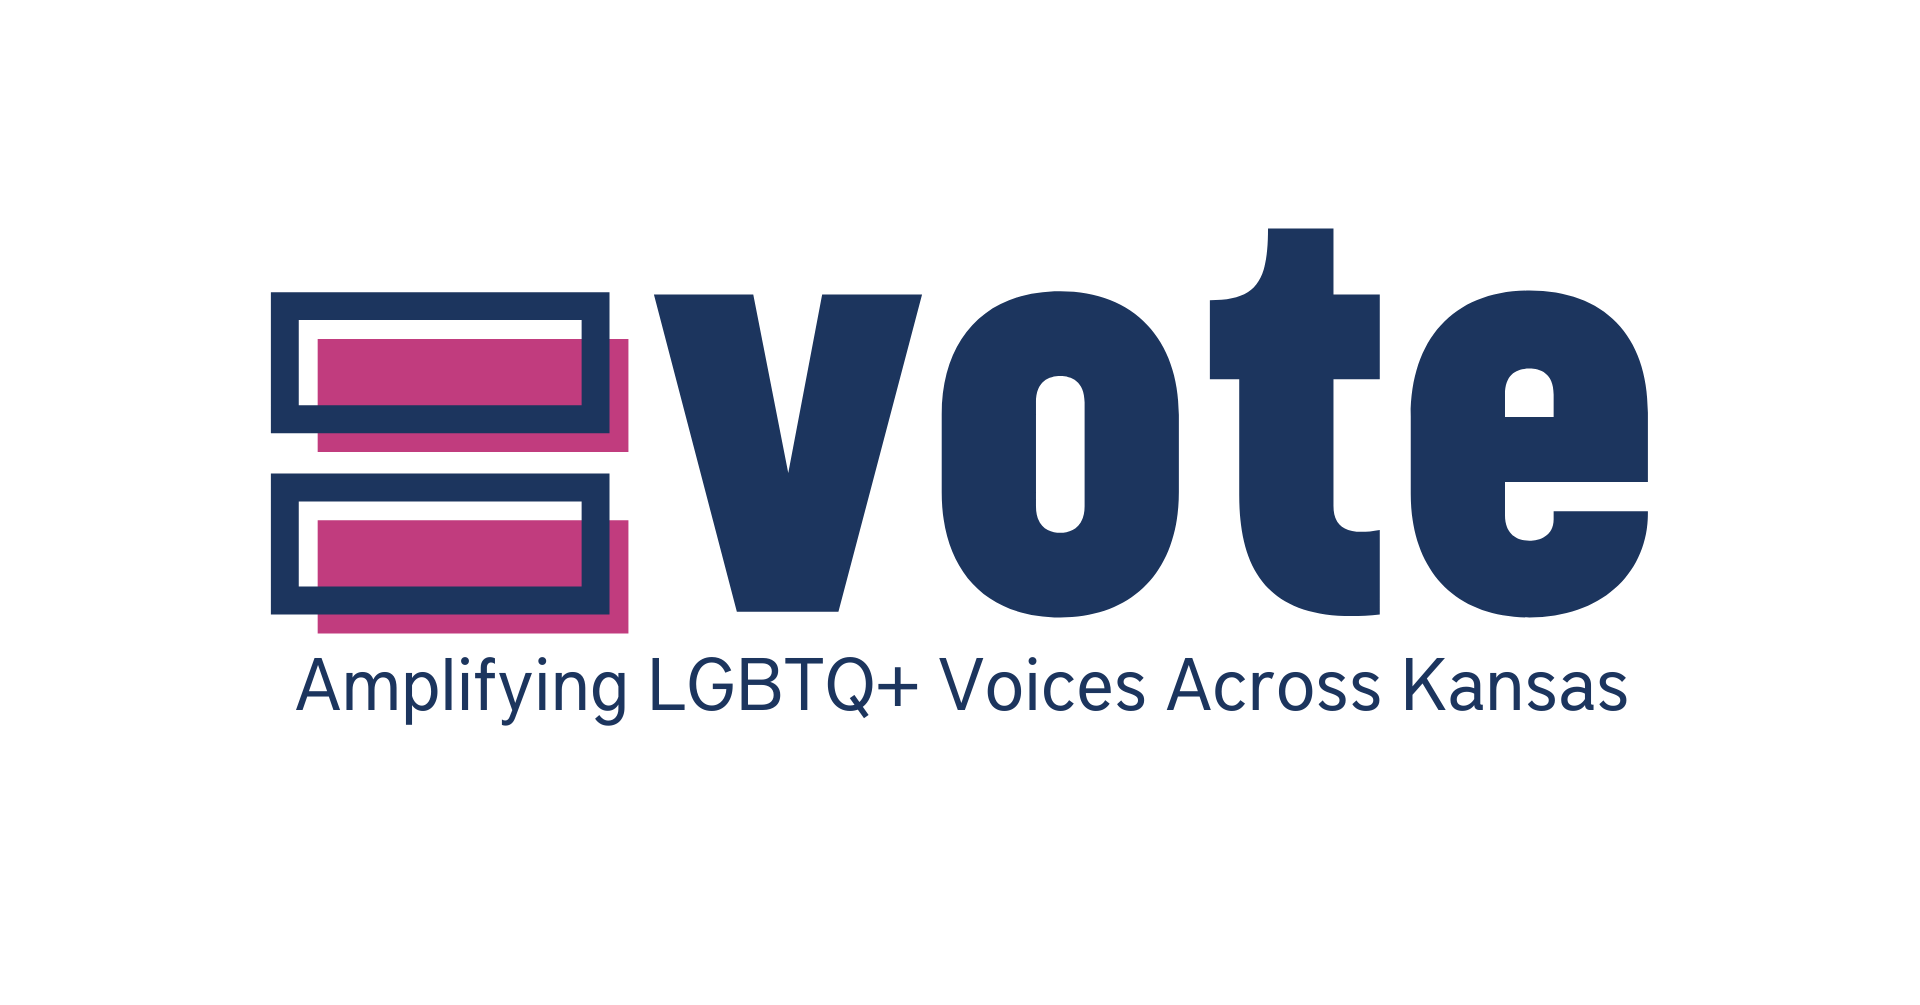 Equality Vote Amplifying LGBTQ+ Voices Across Kansas